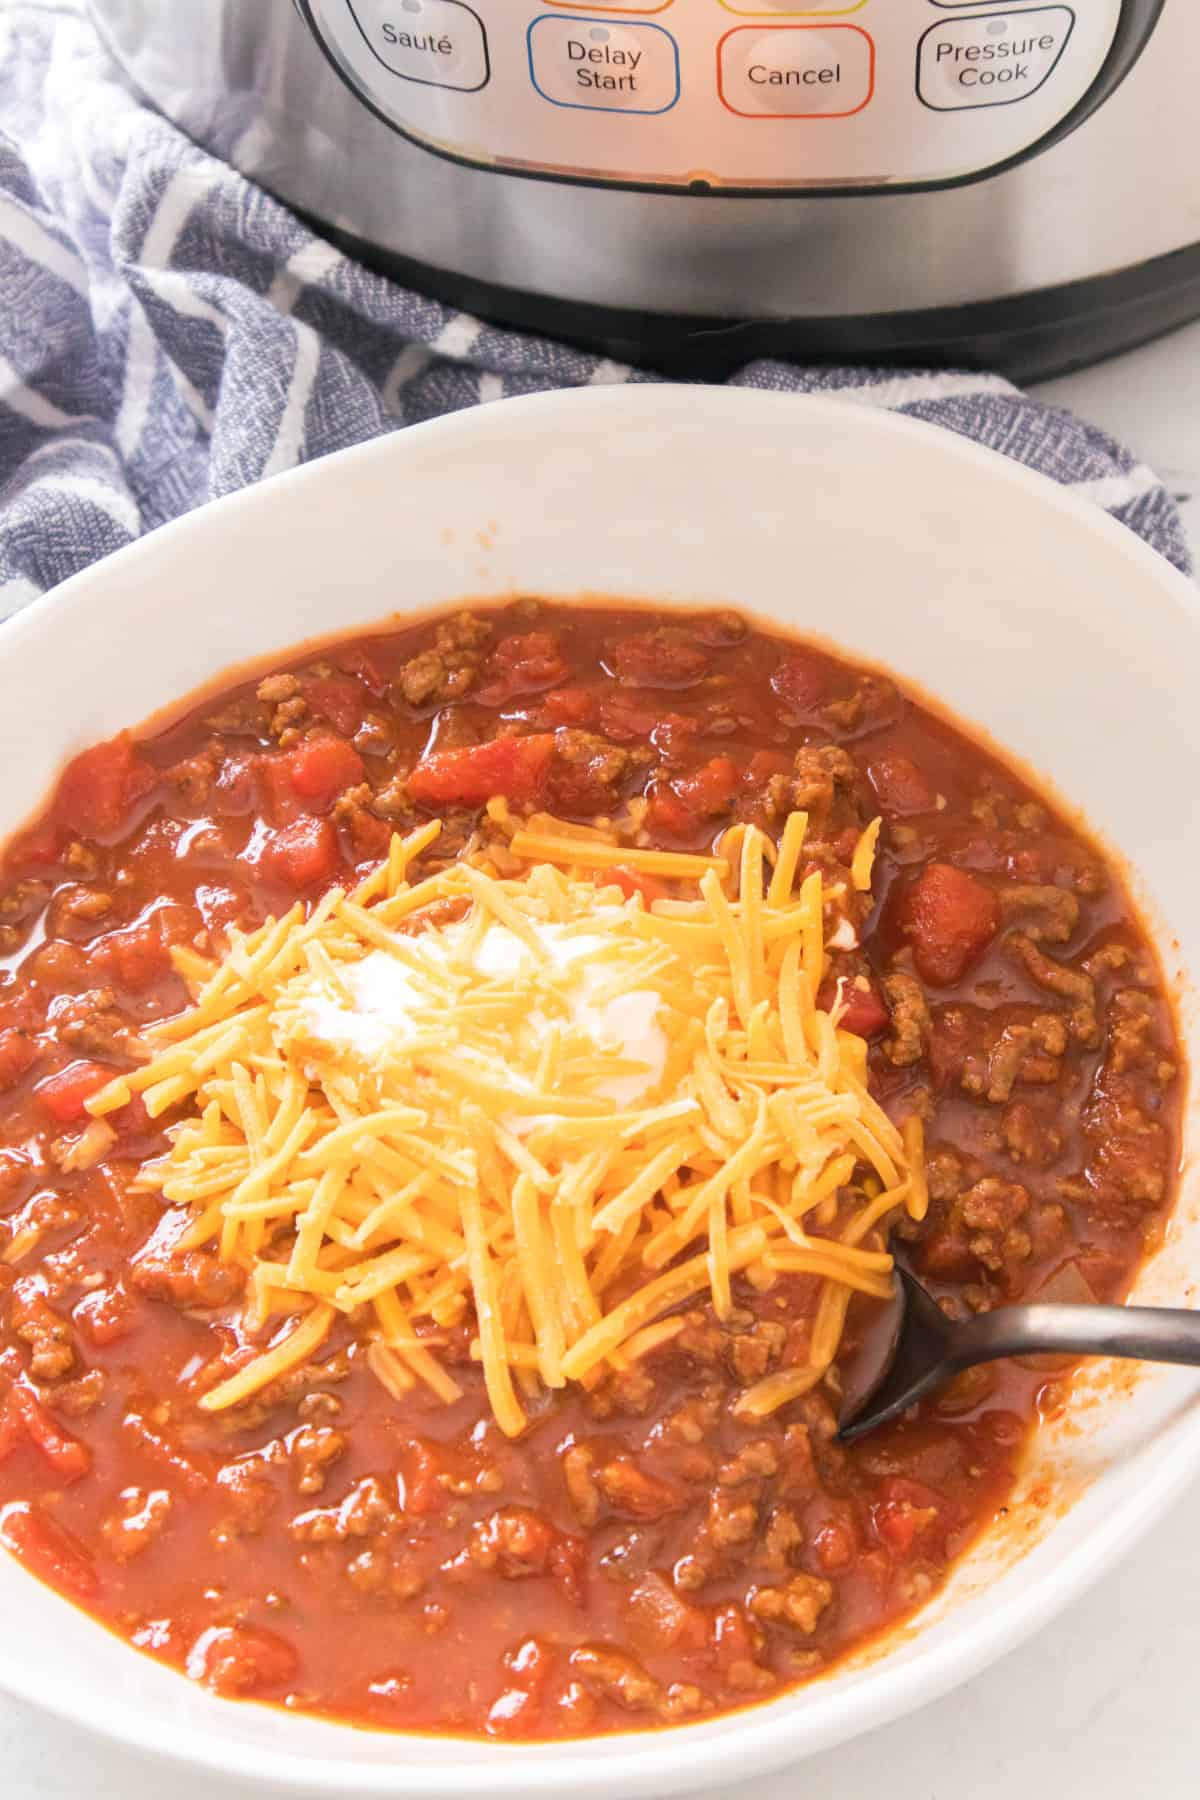 bowl of chili topped with shredded cheddar cheese.